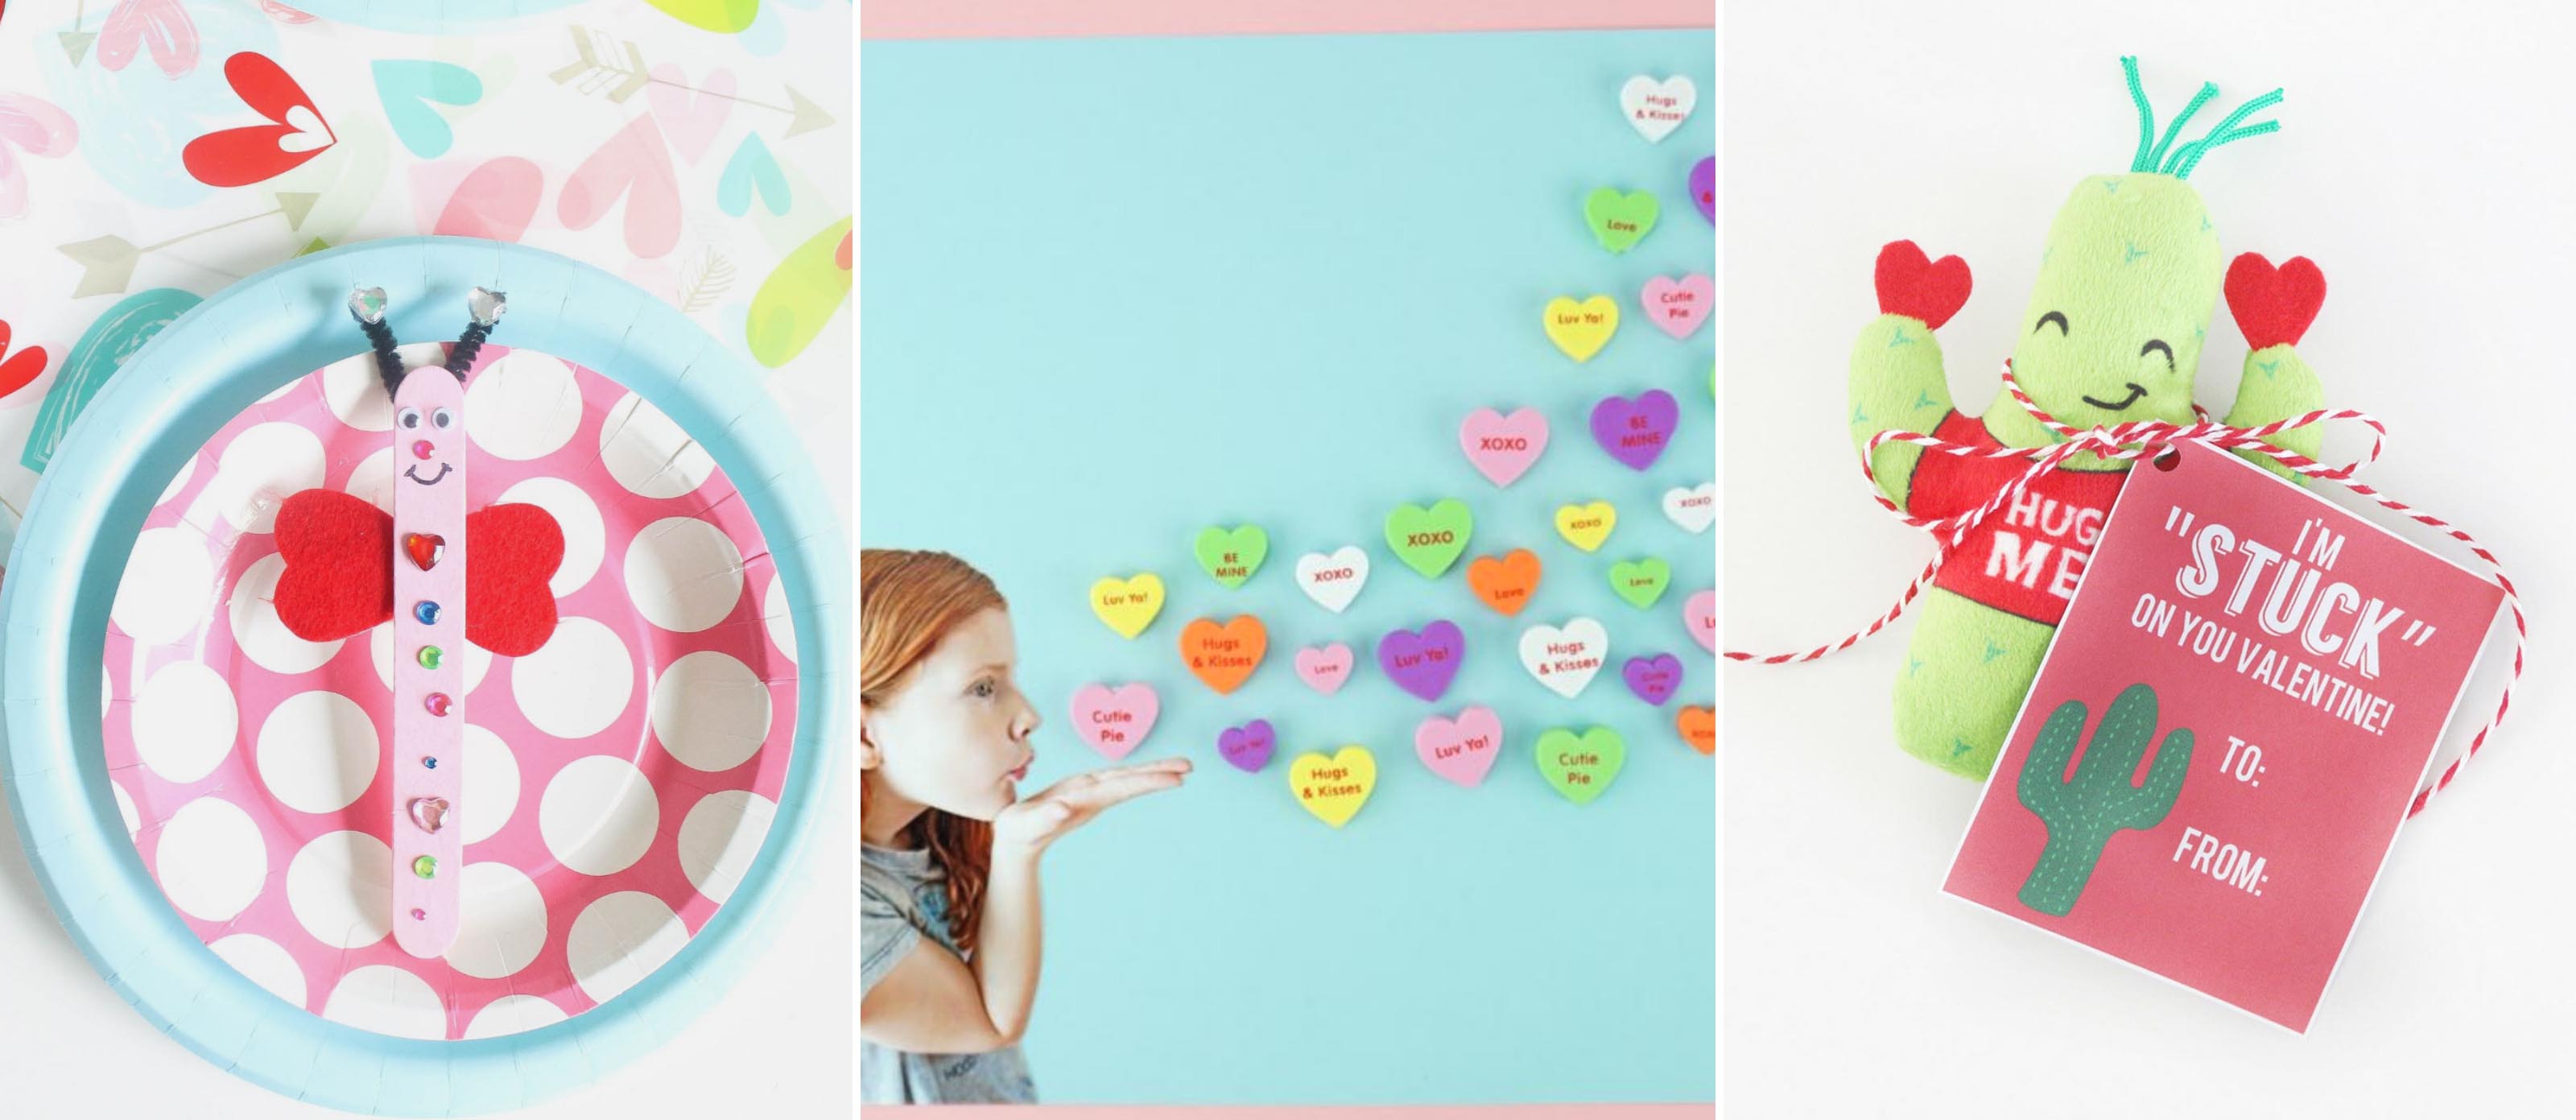 72 Pcs Heart Cutouts Paper Hearts 6 Inches Heart Shaped Cards Large Heart  Shapes Paper Heart Shape Die Cuts for Valentine's Day Craft, Kid's Love and